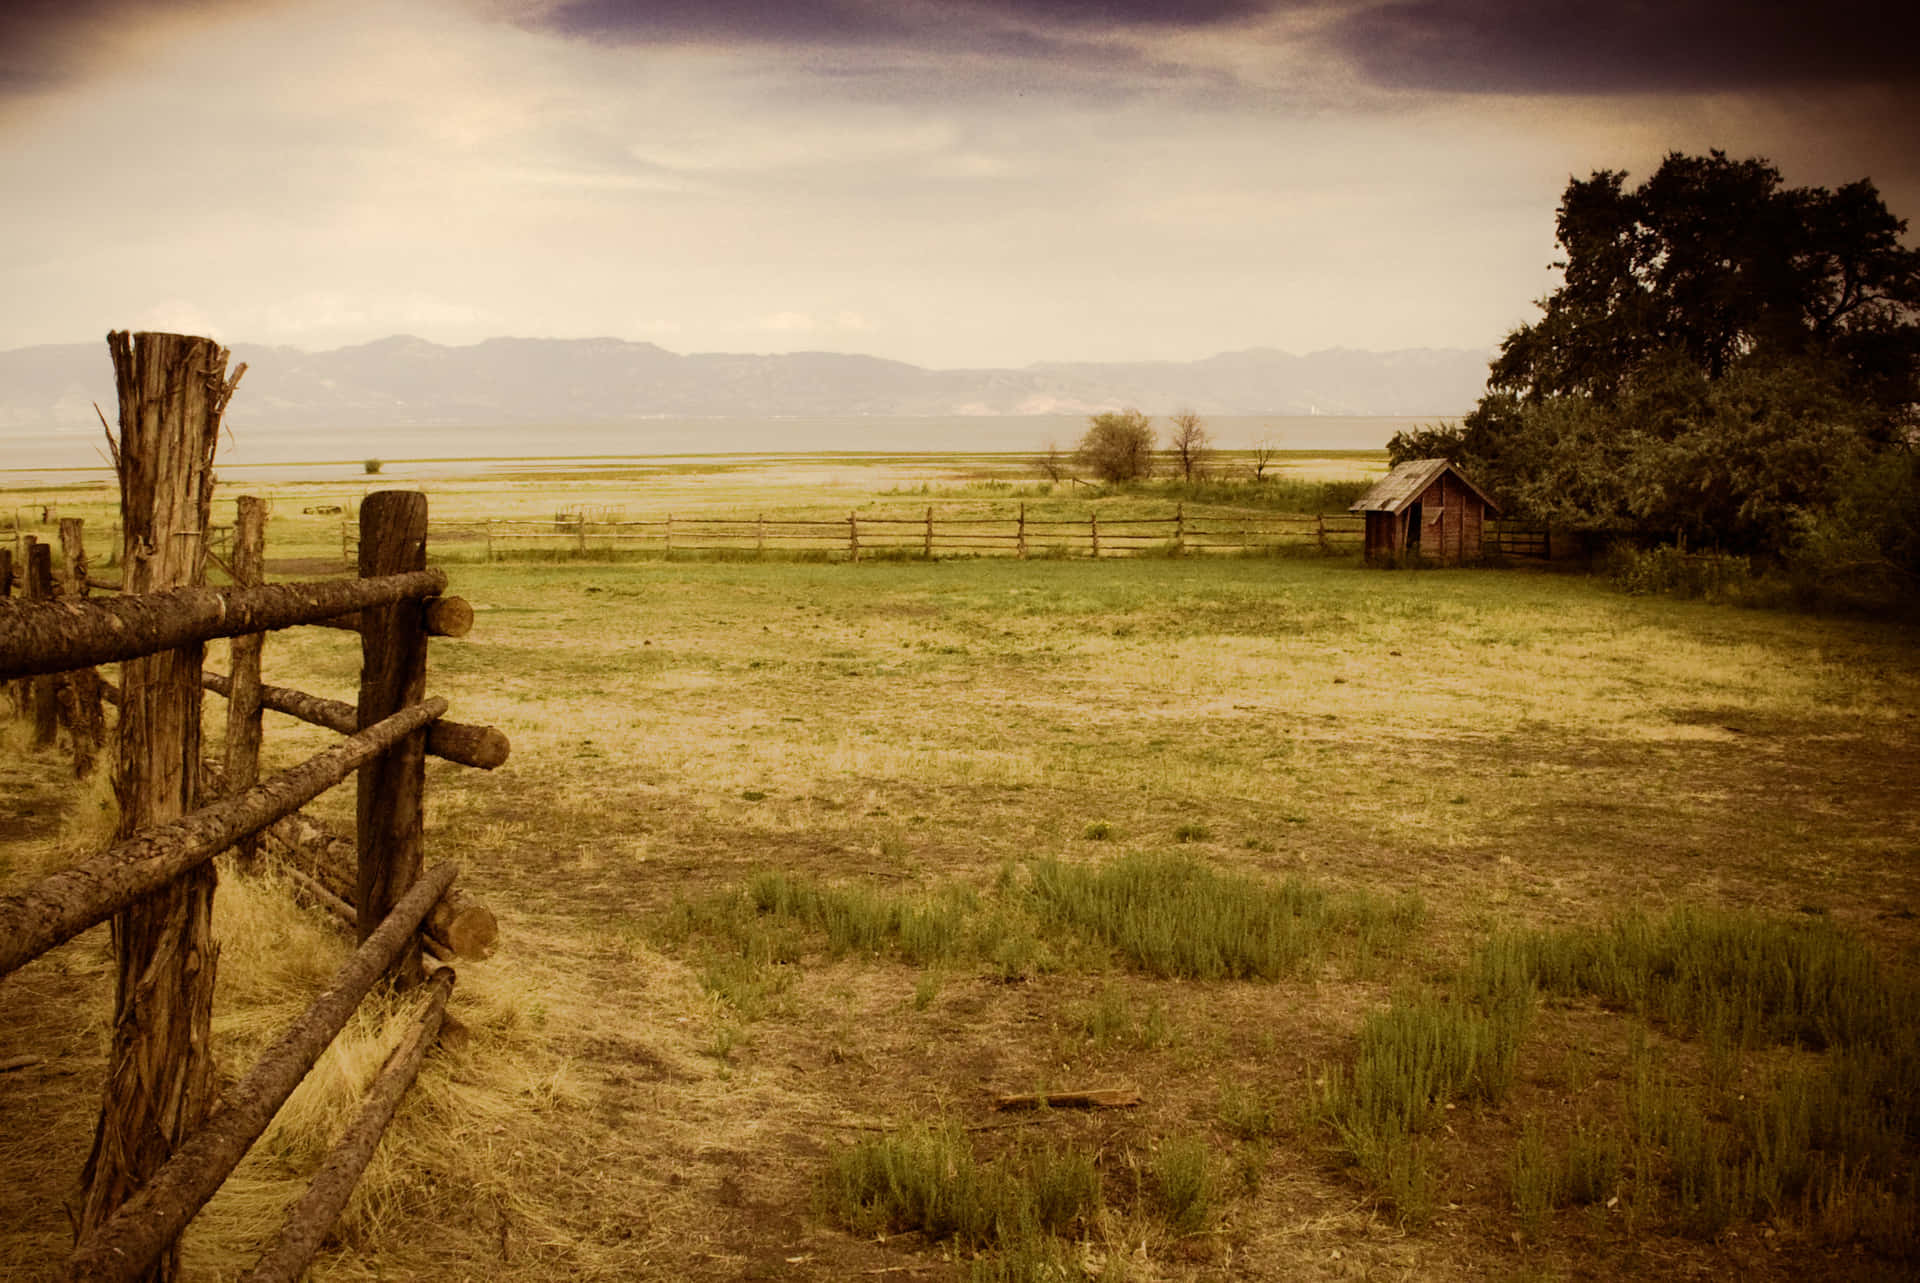 Download Enjoy the scenic views of a picturesque ranch Wallpaper   Wallpaperscom